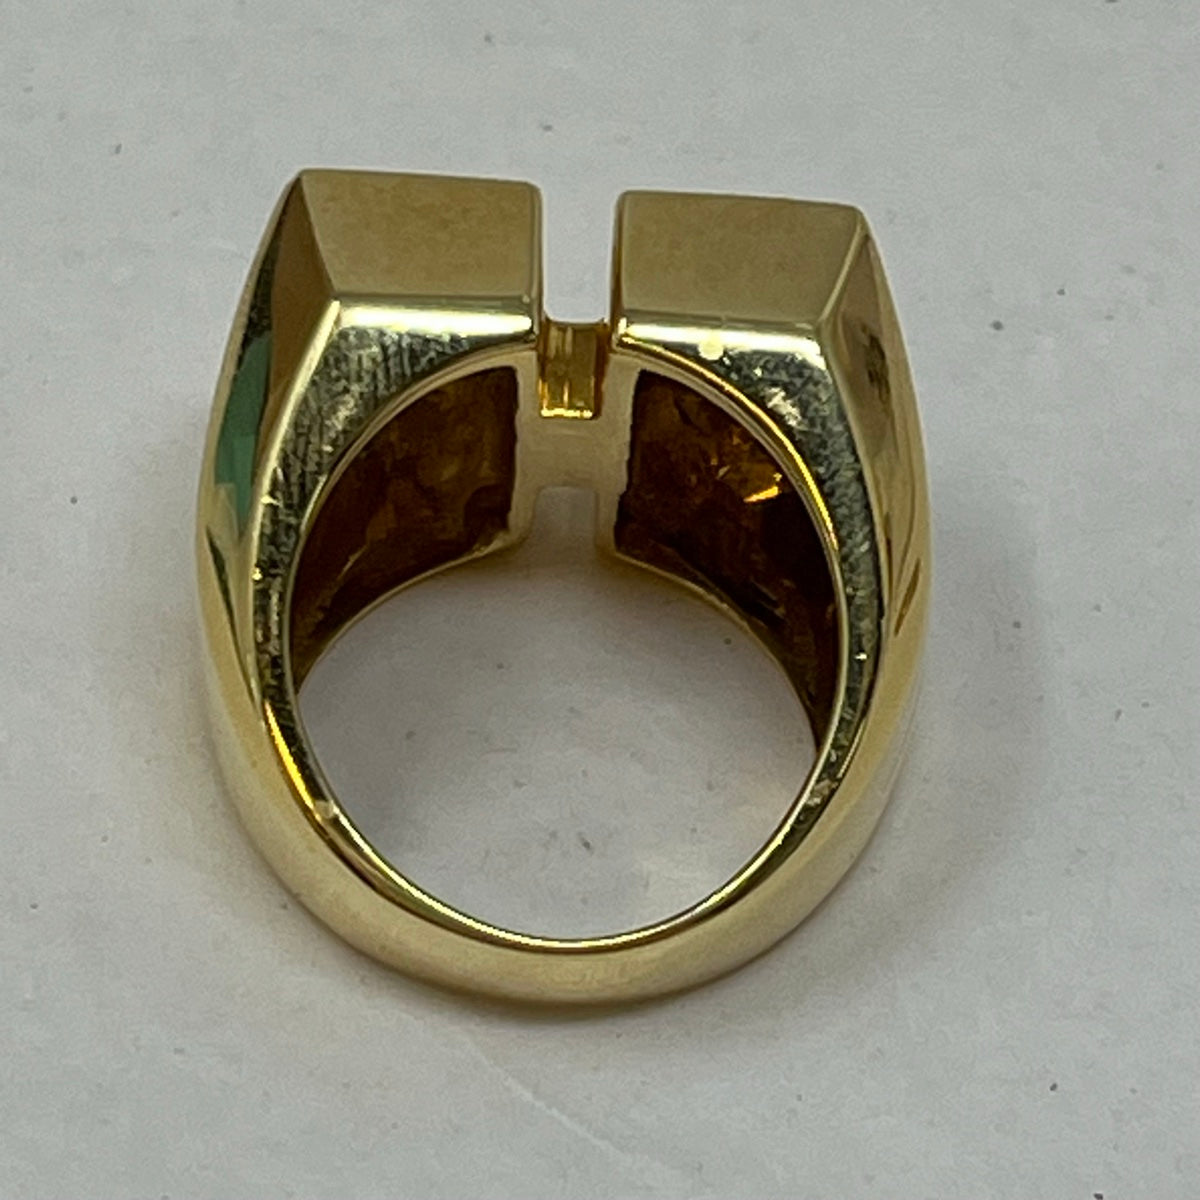 Montreaux 18K Gold Ring with Diamonds